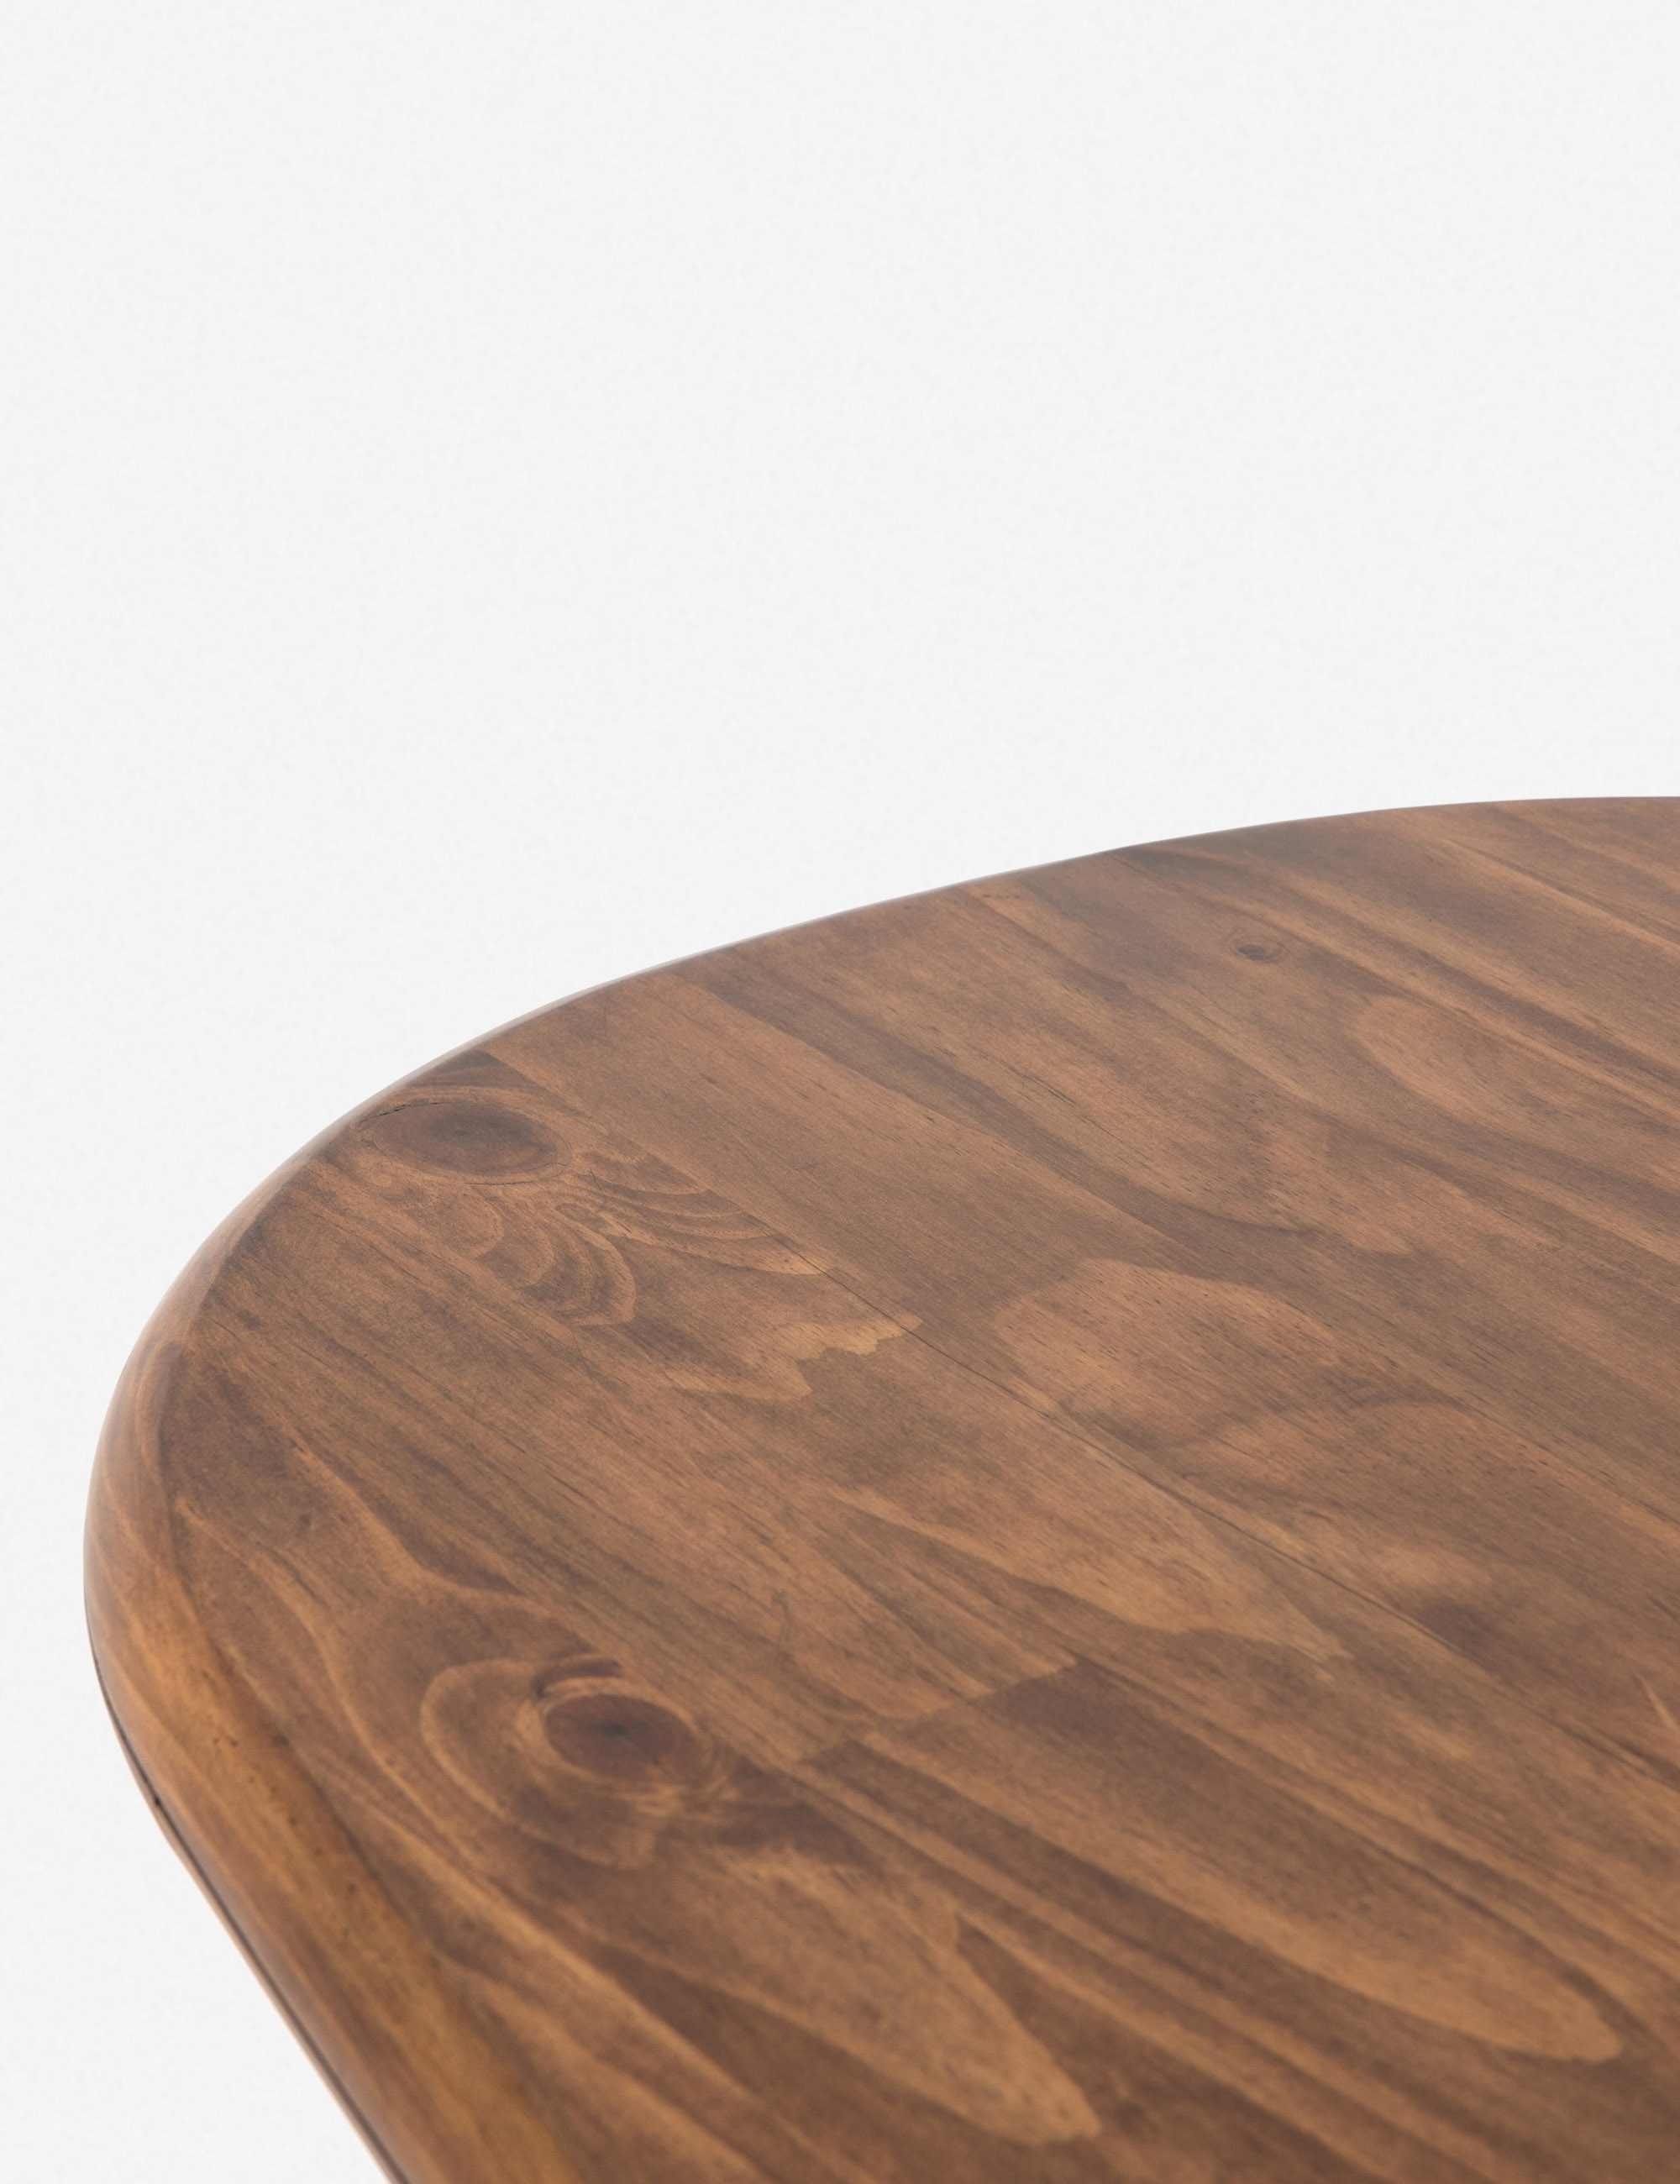 Marquesa Dining Table - Image 6